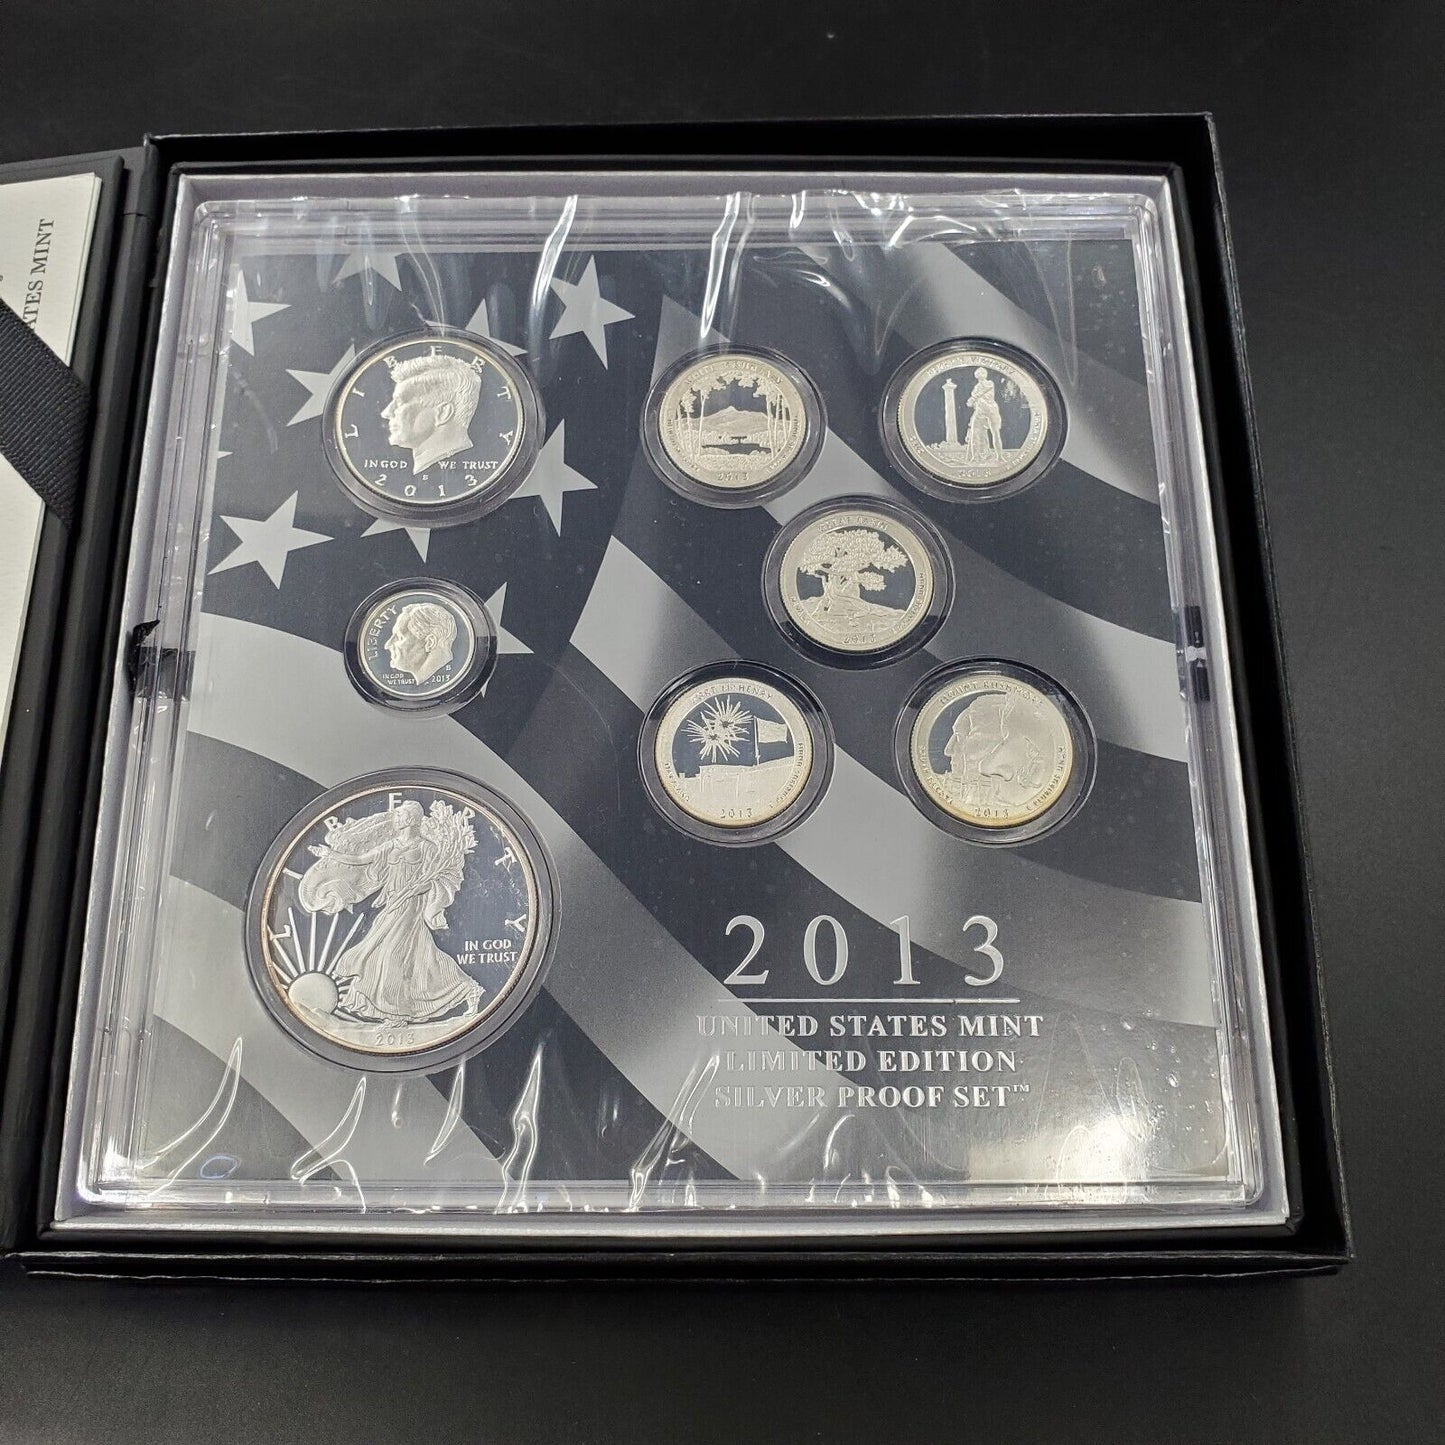 2013 United States Mint Limited Edition Silver Proof Set